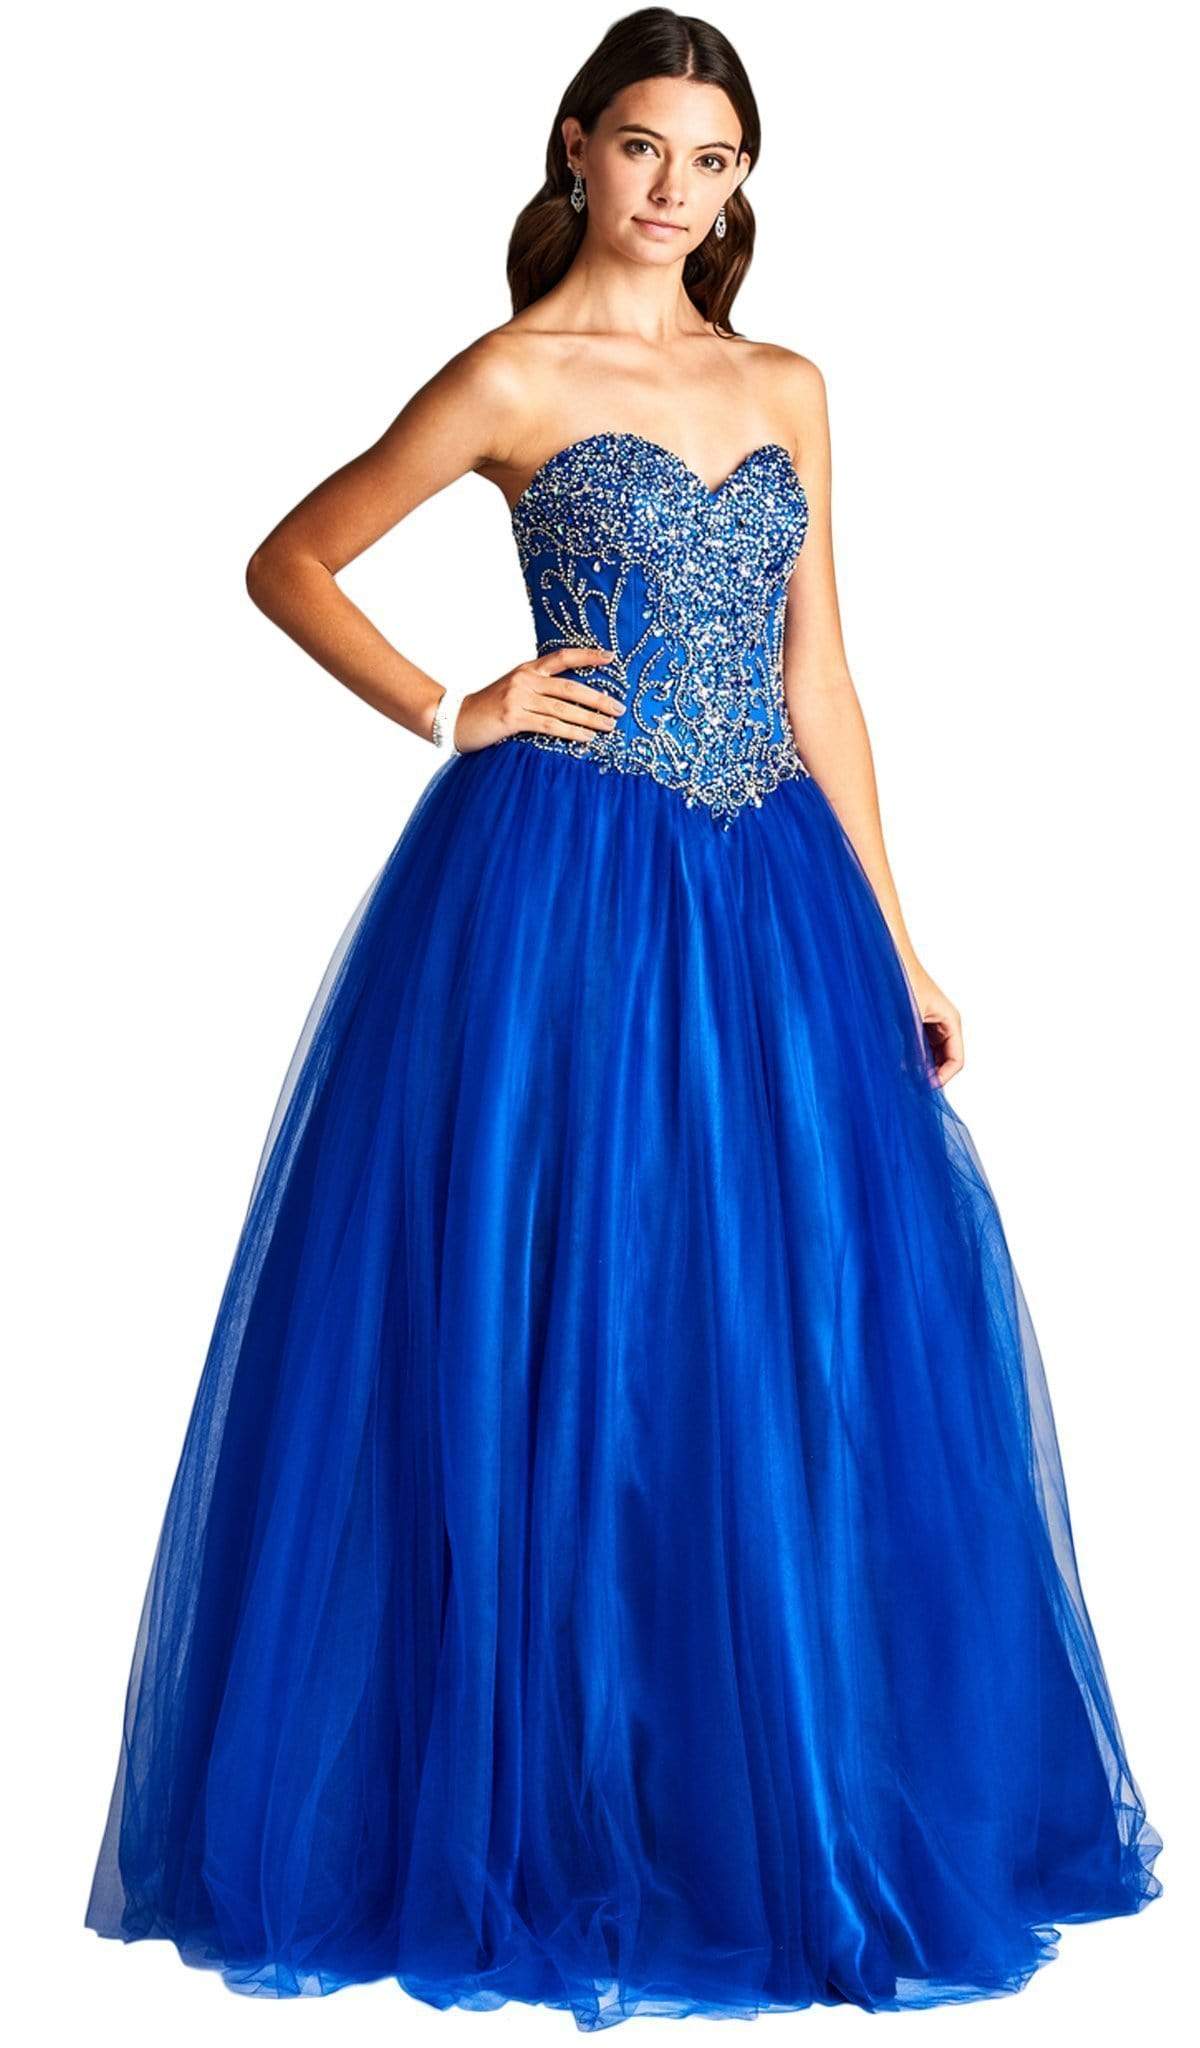 Image of Aspeed Design - Bejeweled Strapless Sweetheart Evening Ballgown